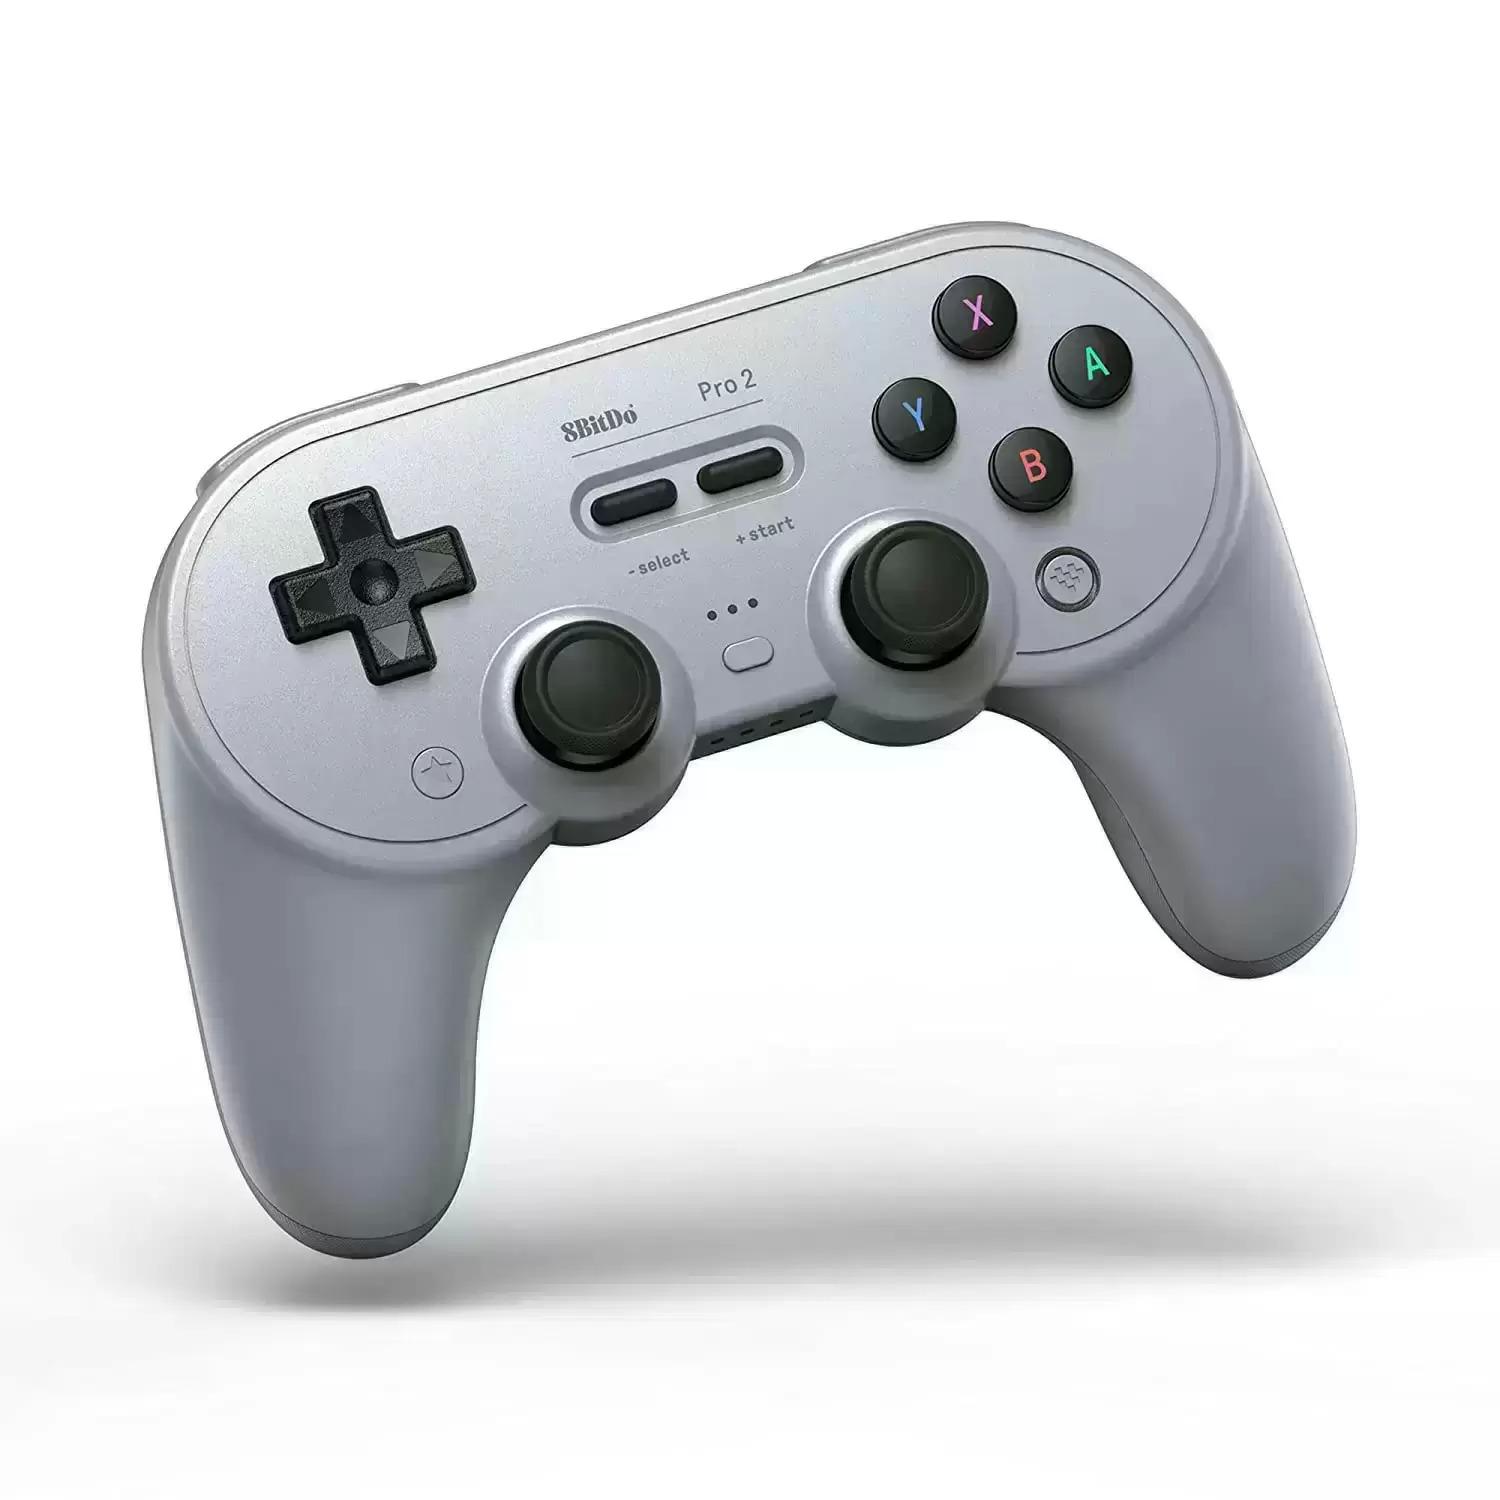 8BitDo Pro 2 Bluetooth Controller for $39.99 Shipped